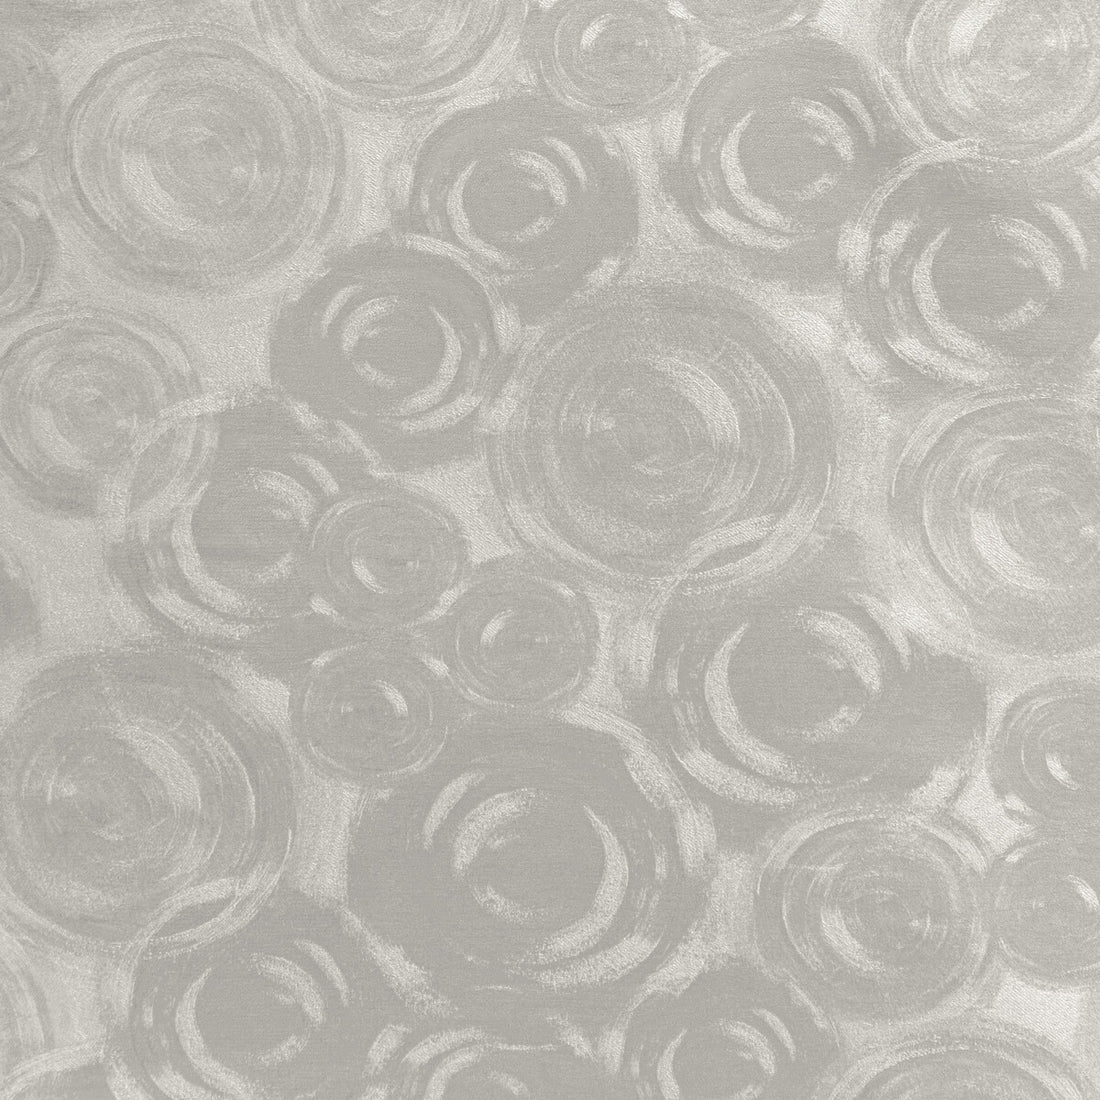 Silk Cosmos fabric in platinum color - pattern 4956.11.0 - by Kravet Couture in the Modern Luxe Silk Luster collection